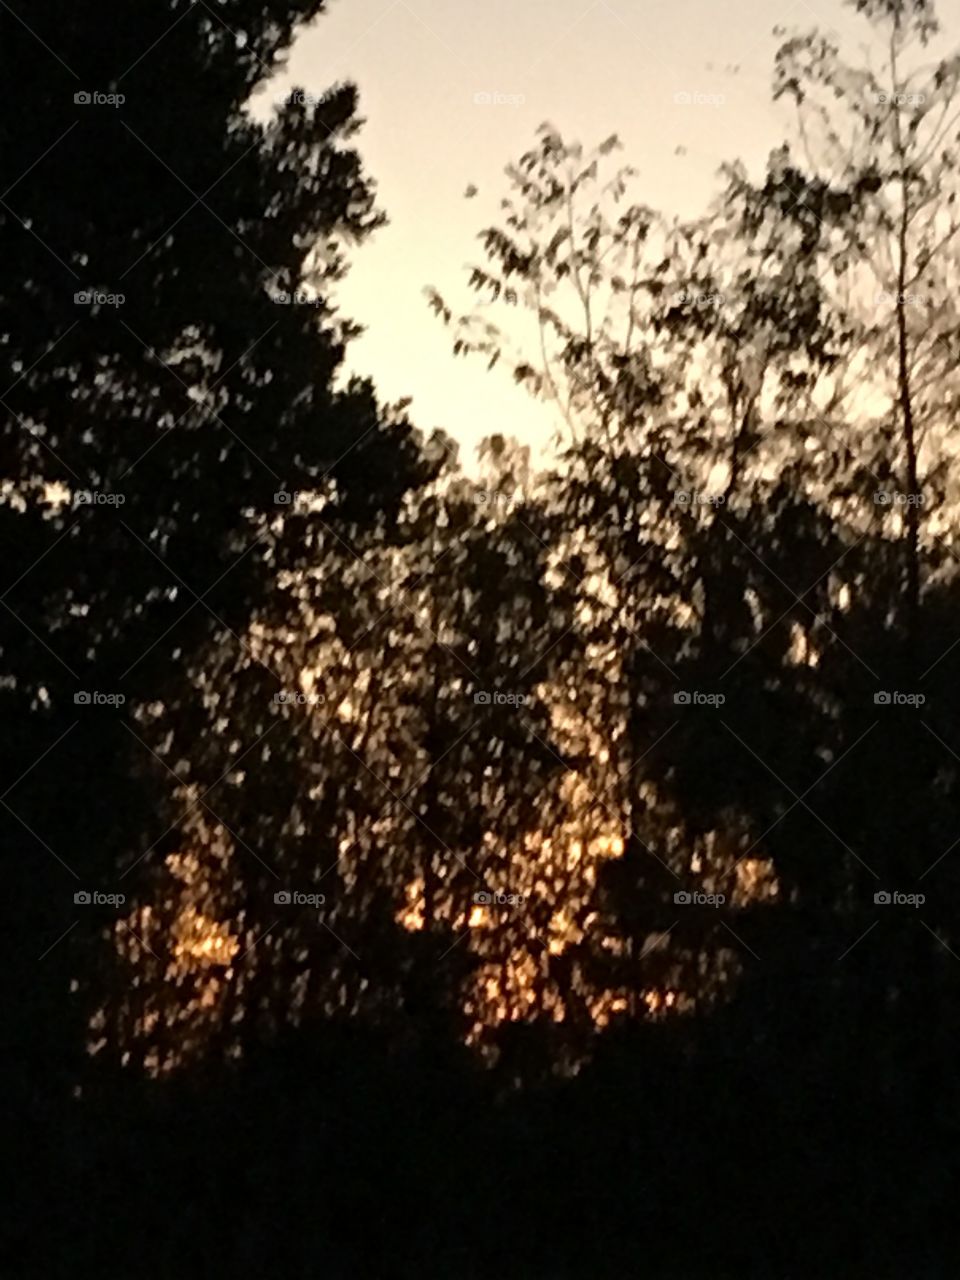 Sunset among the branches of a tree